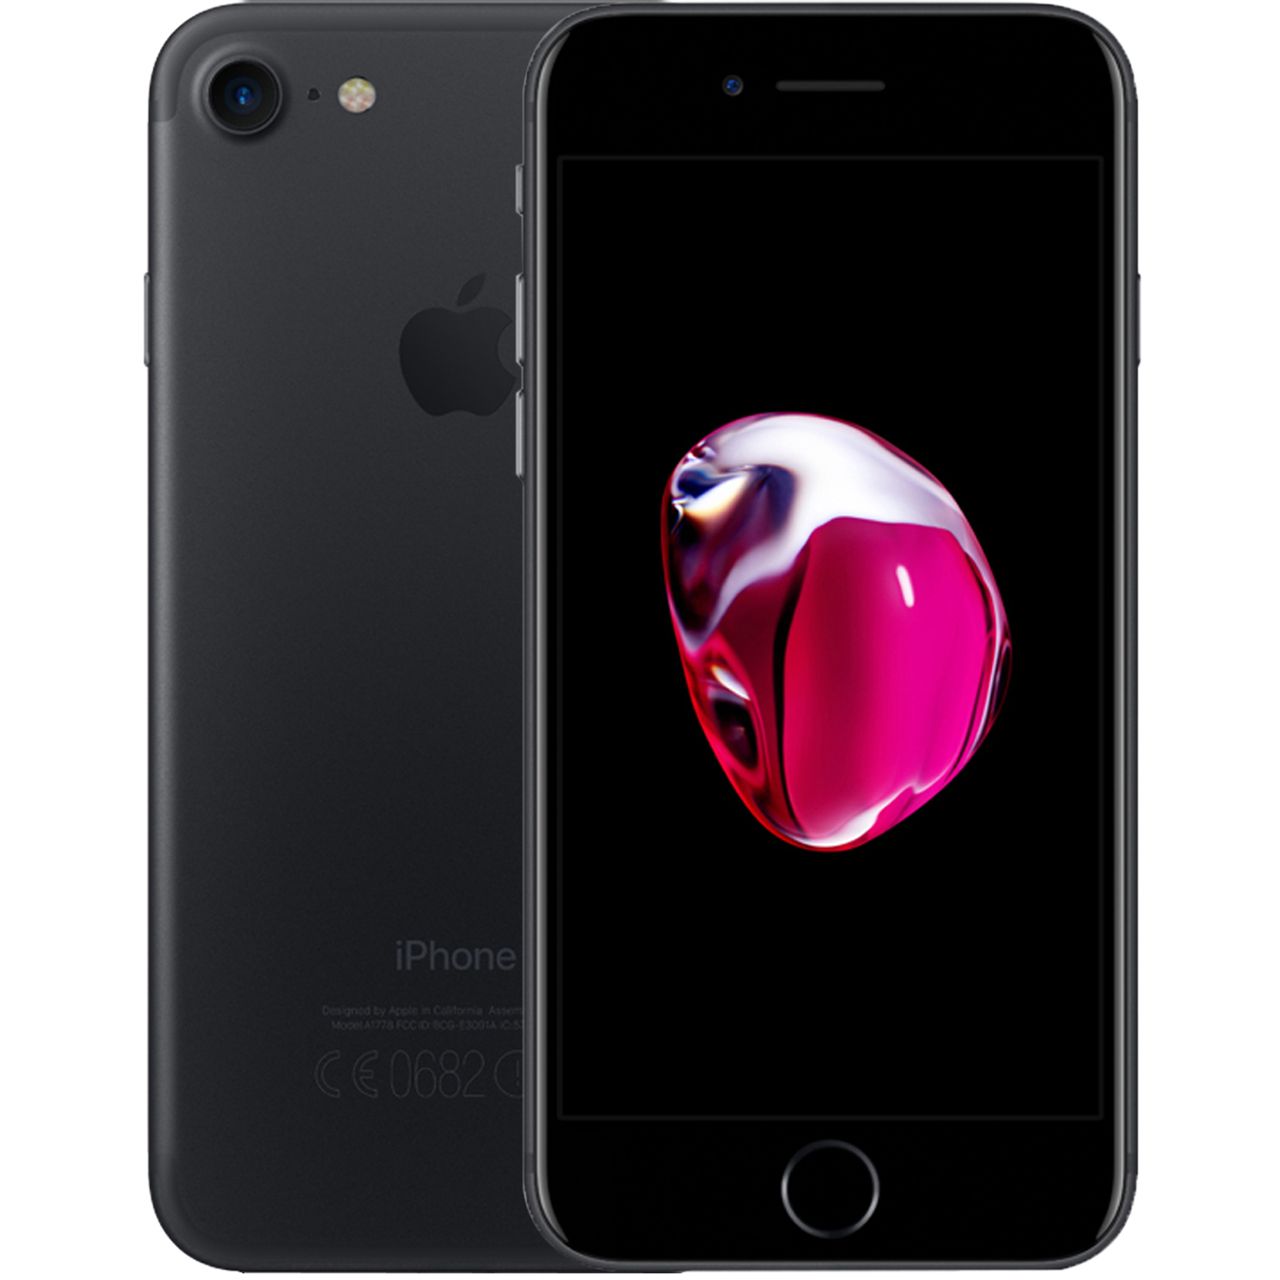 Apple iPhone 7 32GB in Black Review